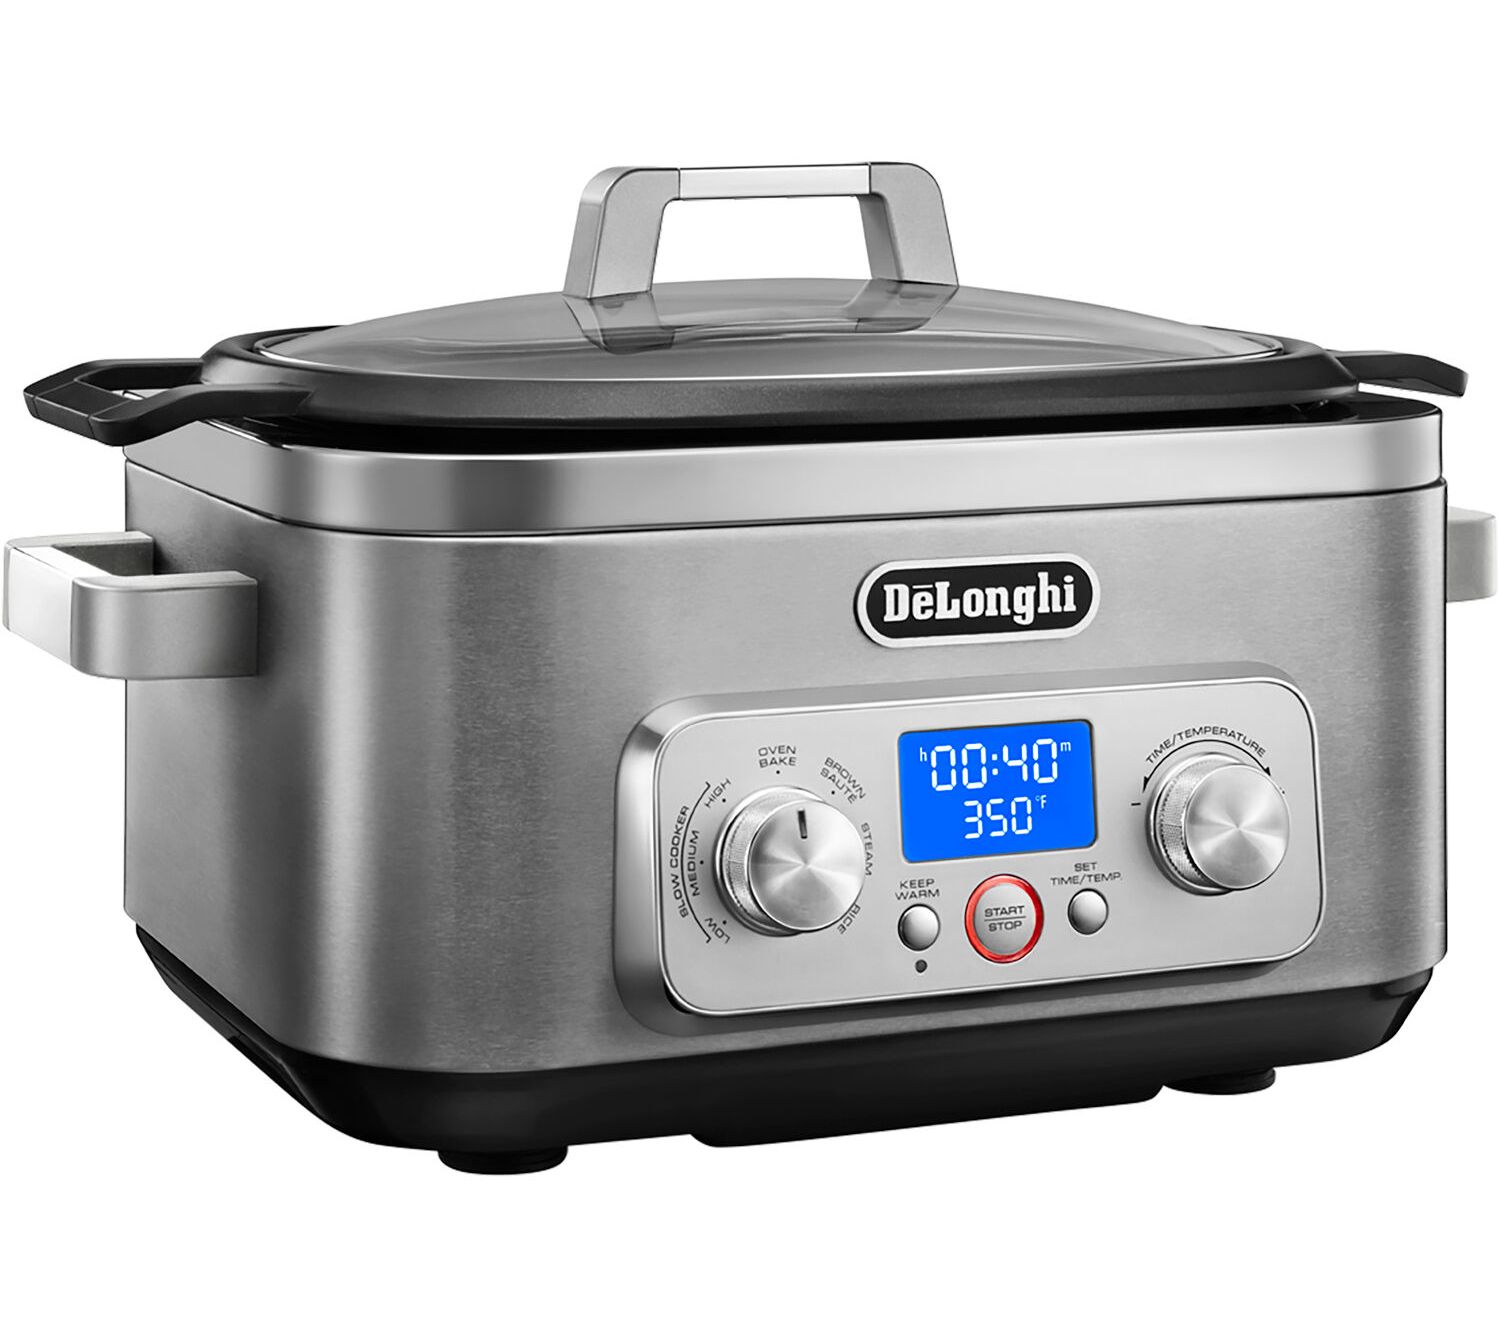 West Bend 6 Qt. Oval Slow Cooker in Silver